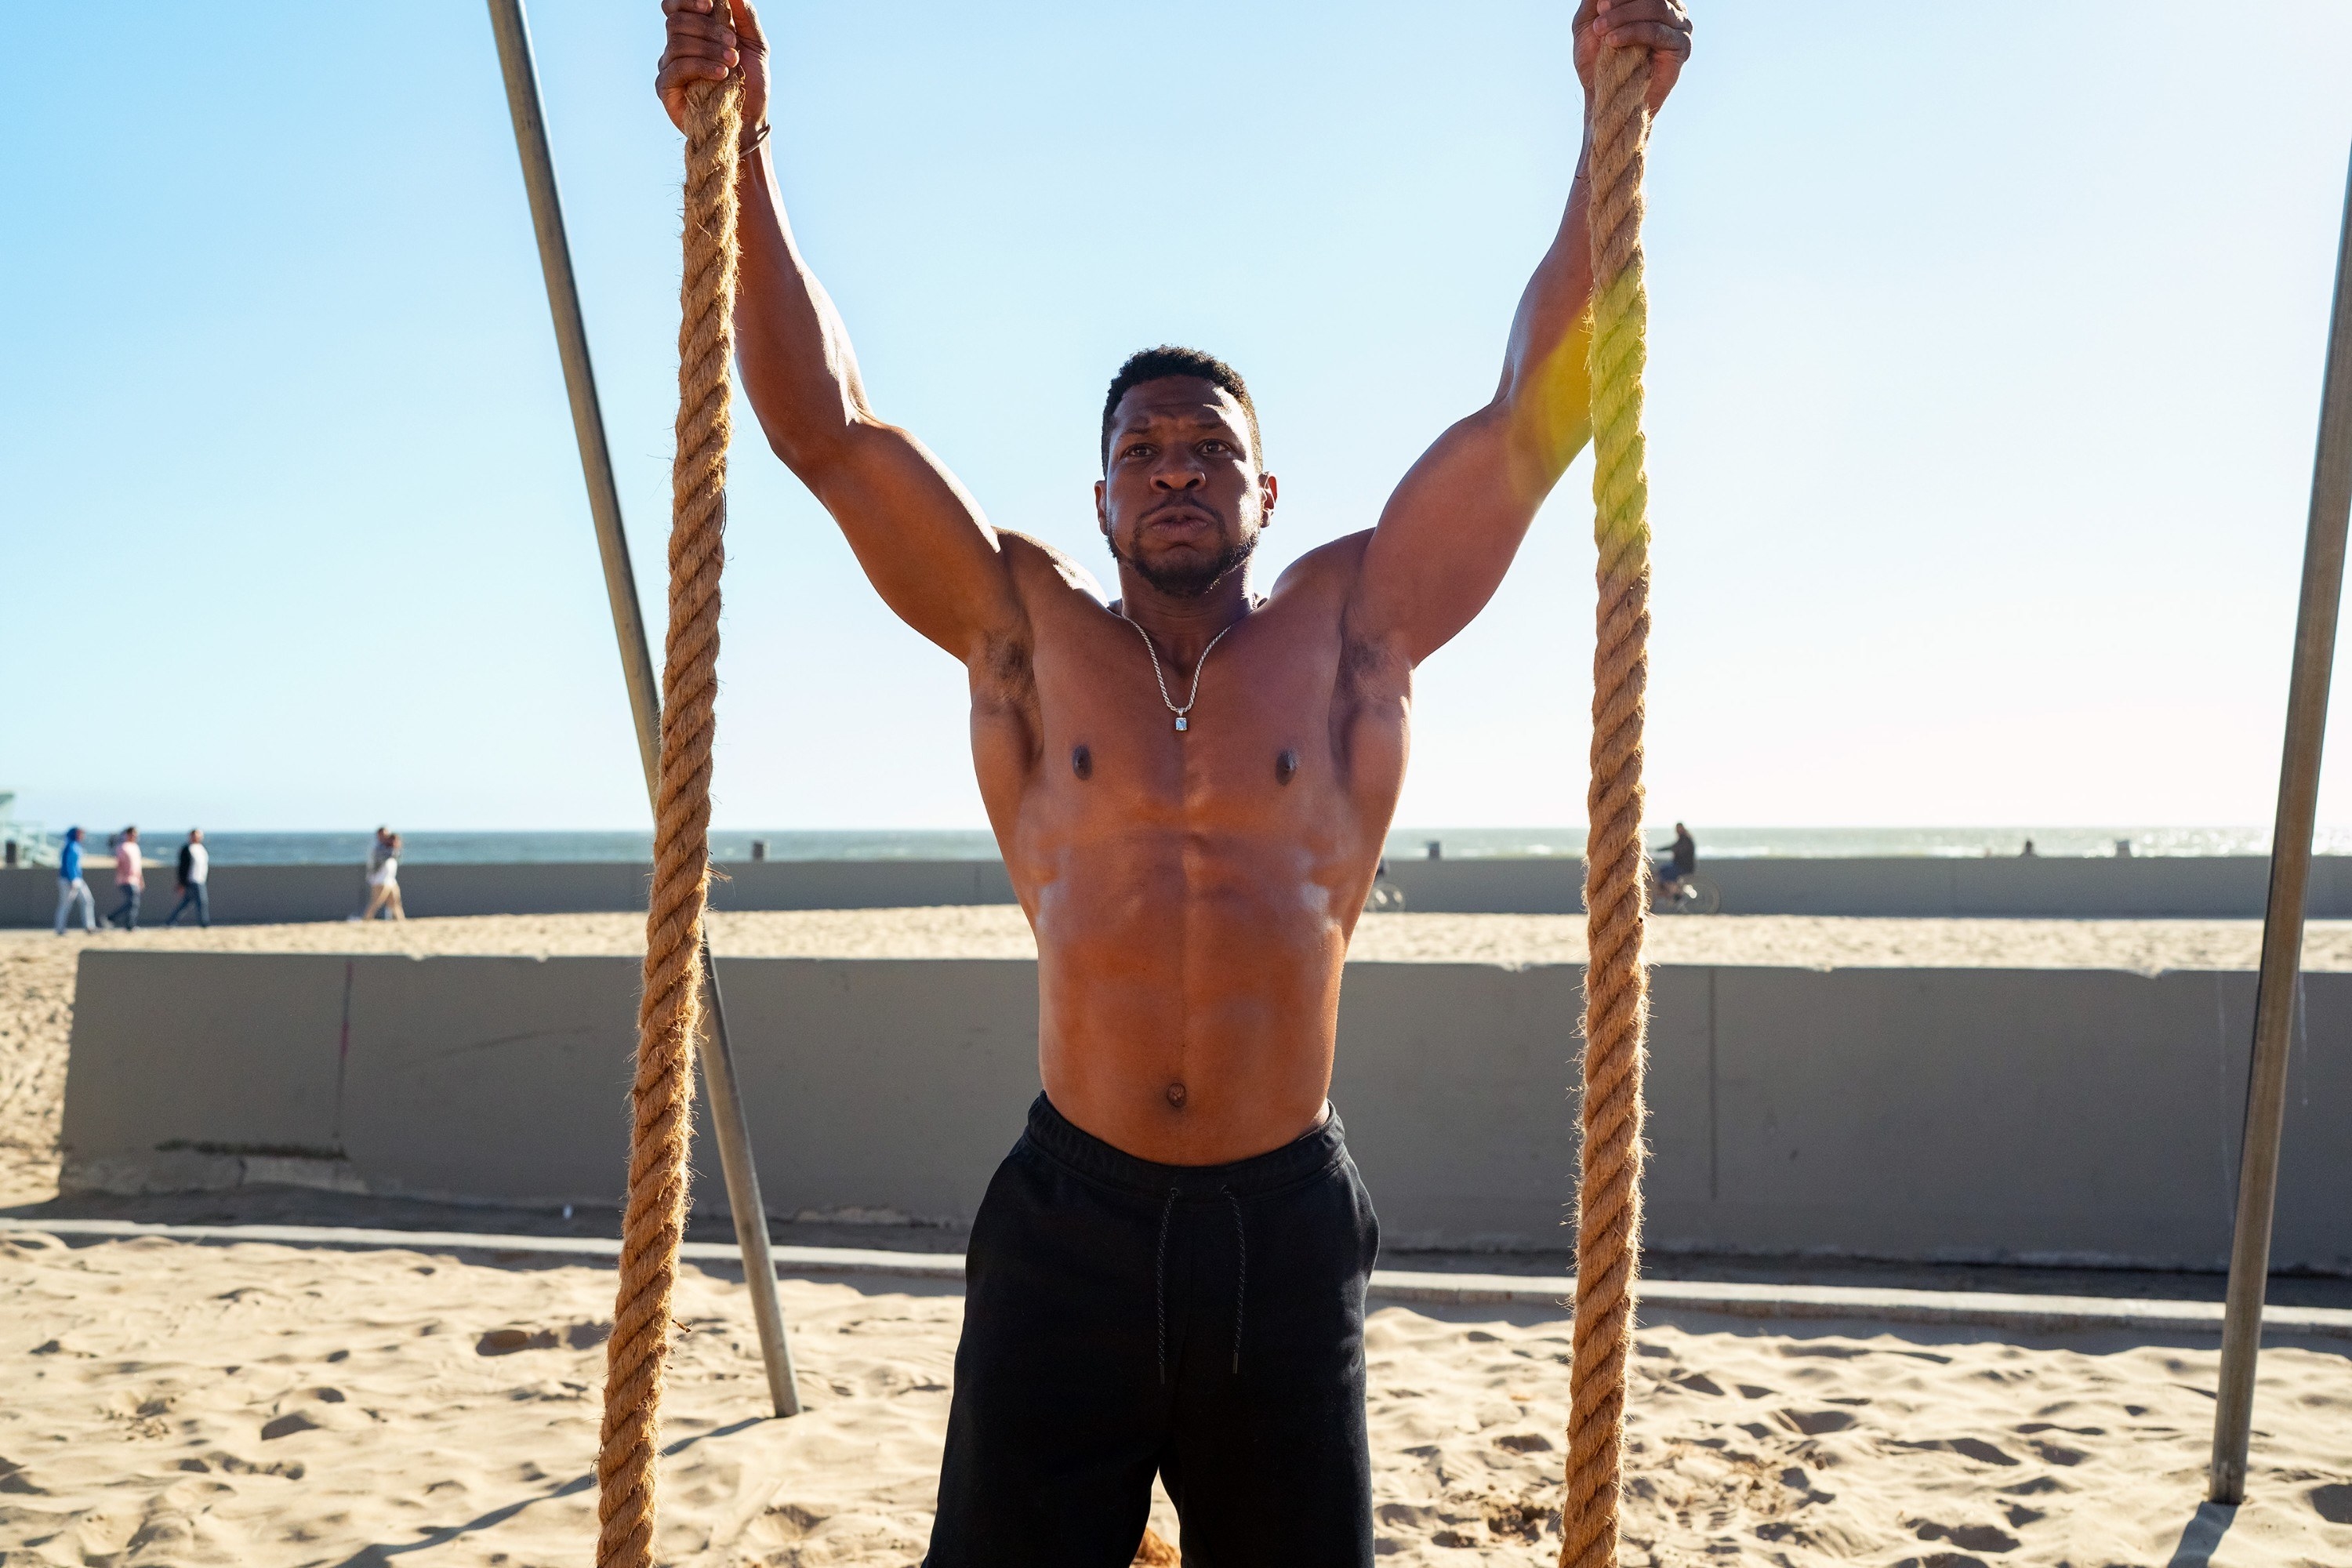 Majors on the beach holding up ropes for a workout